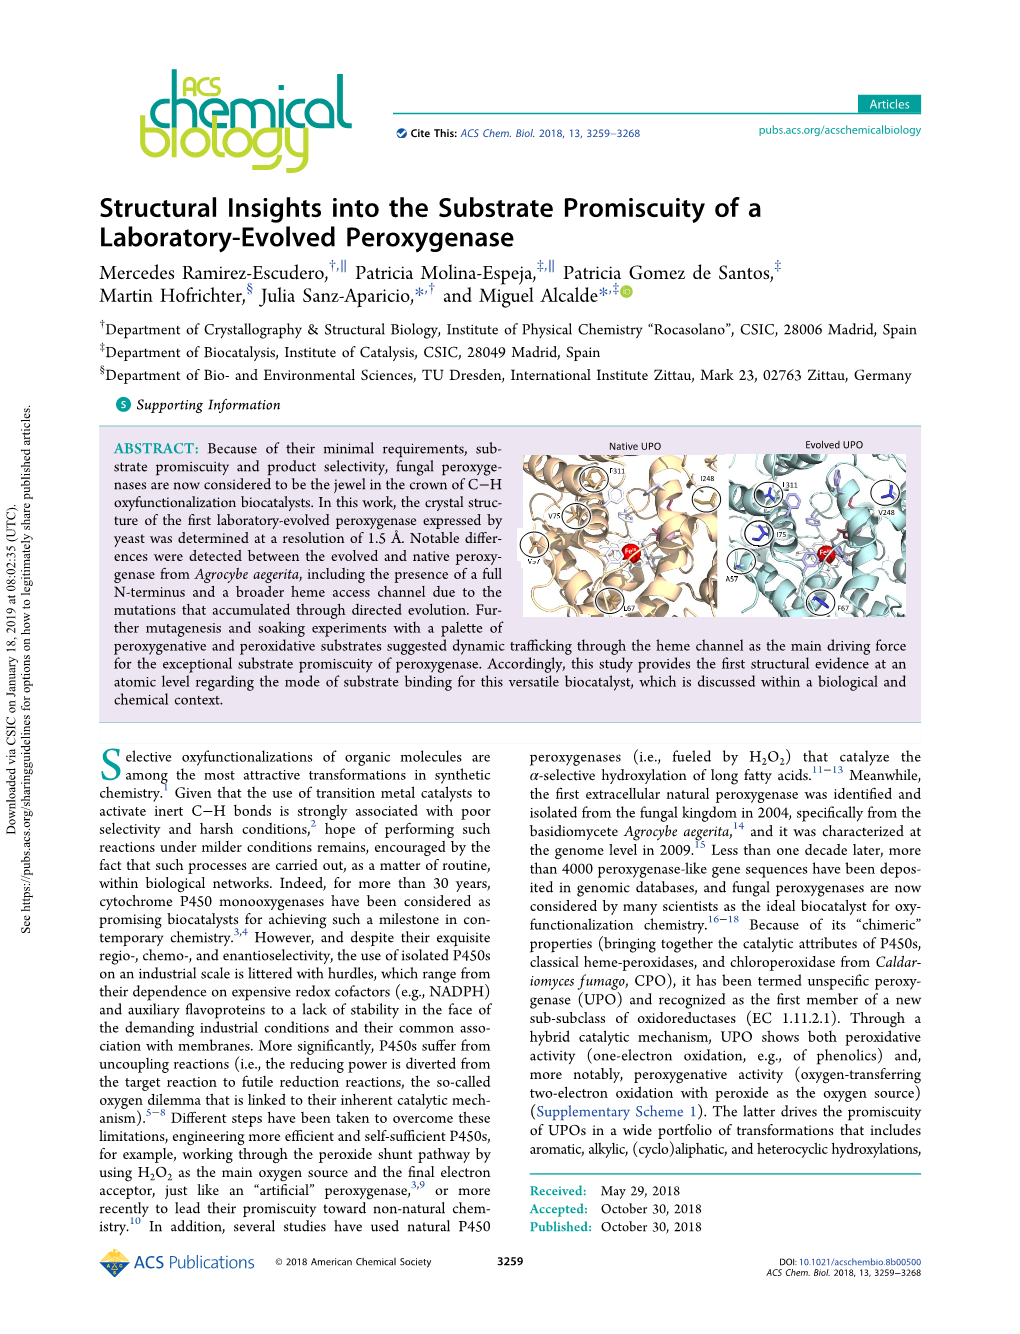 Structural Insights Into the Substrate Promiscuity of a Laboratory-Evolved Peroxygenase